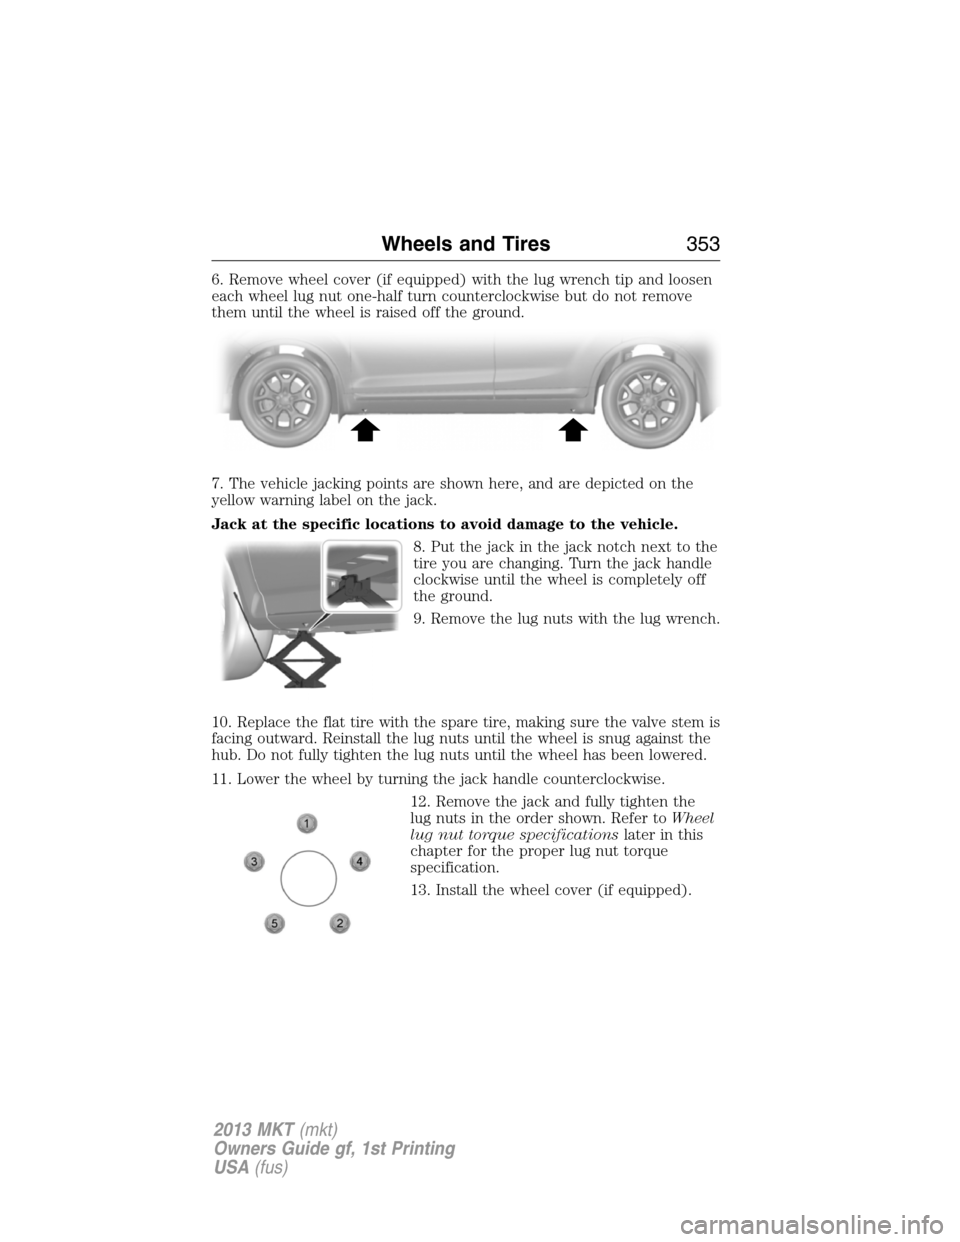 LINCOLN MKT 2013  Owners Manual 6. Remove wheel cover (if equipped) with the lug wrench tip and loosen
each wheel lug nut one-half turn counterclockwise but do not remove
them until the wheel is raised off the ground.
7. The vehicle